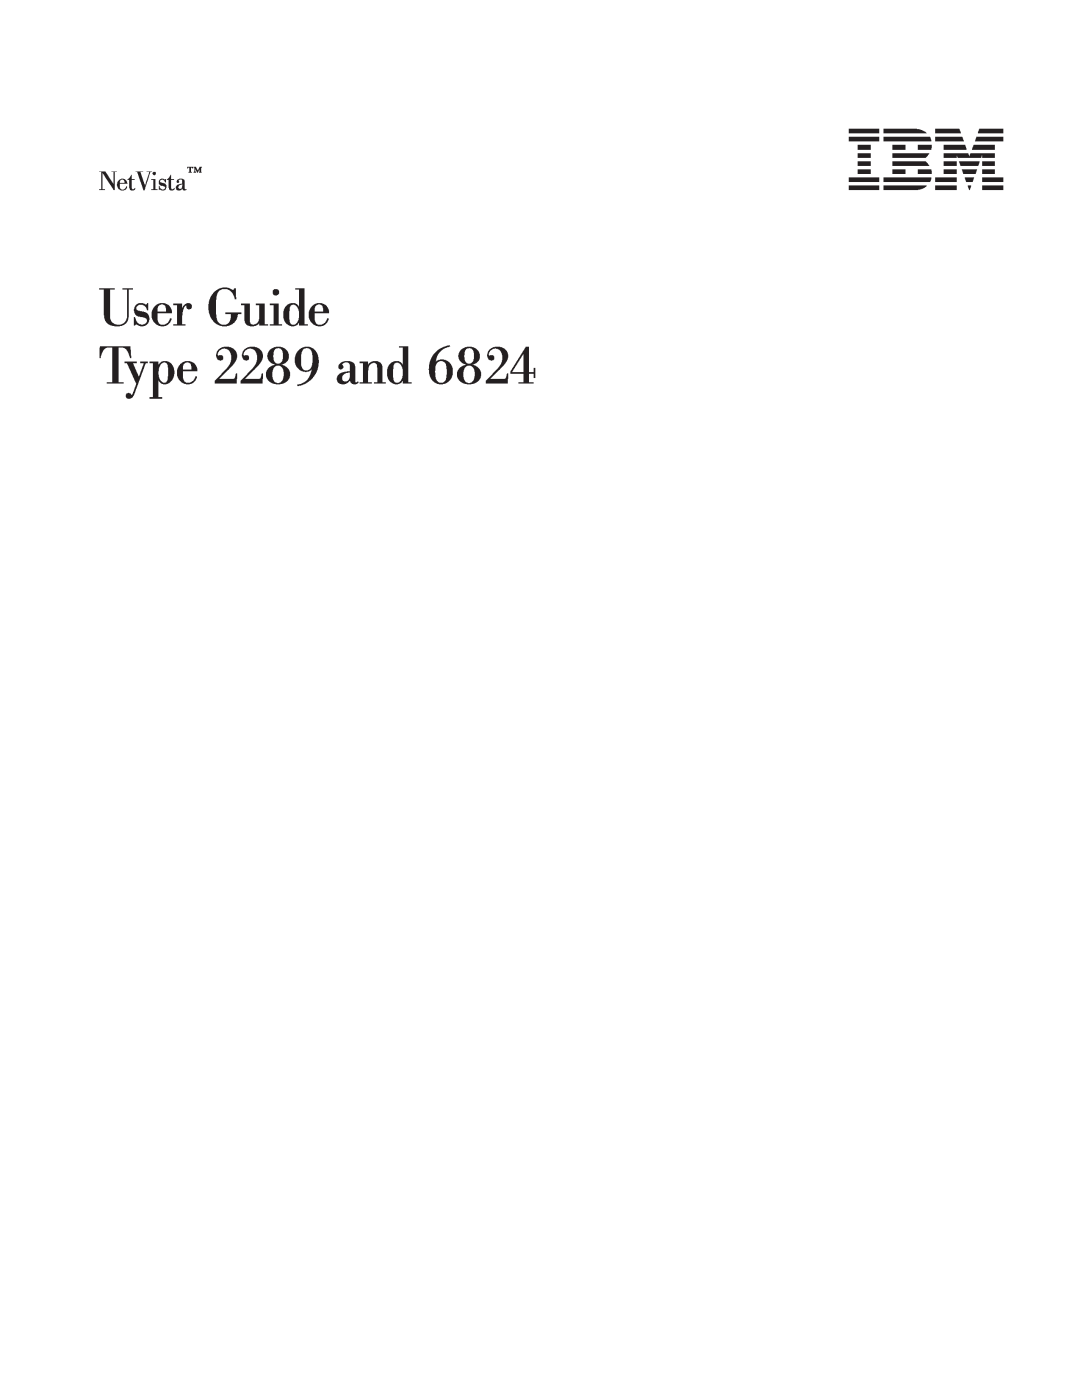 IBM 6824 manual User Guide Type 2289 and, NetVista 